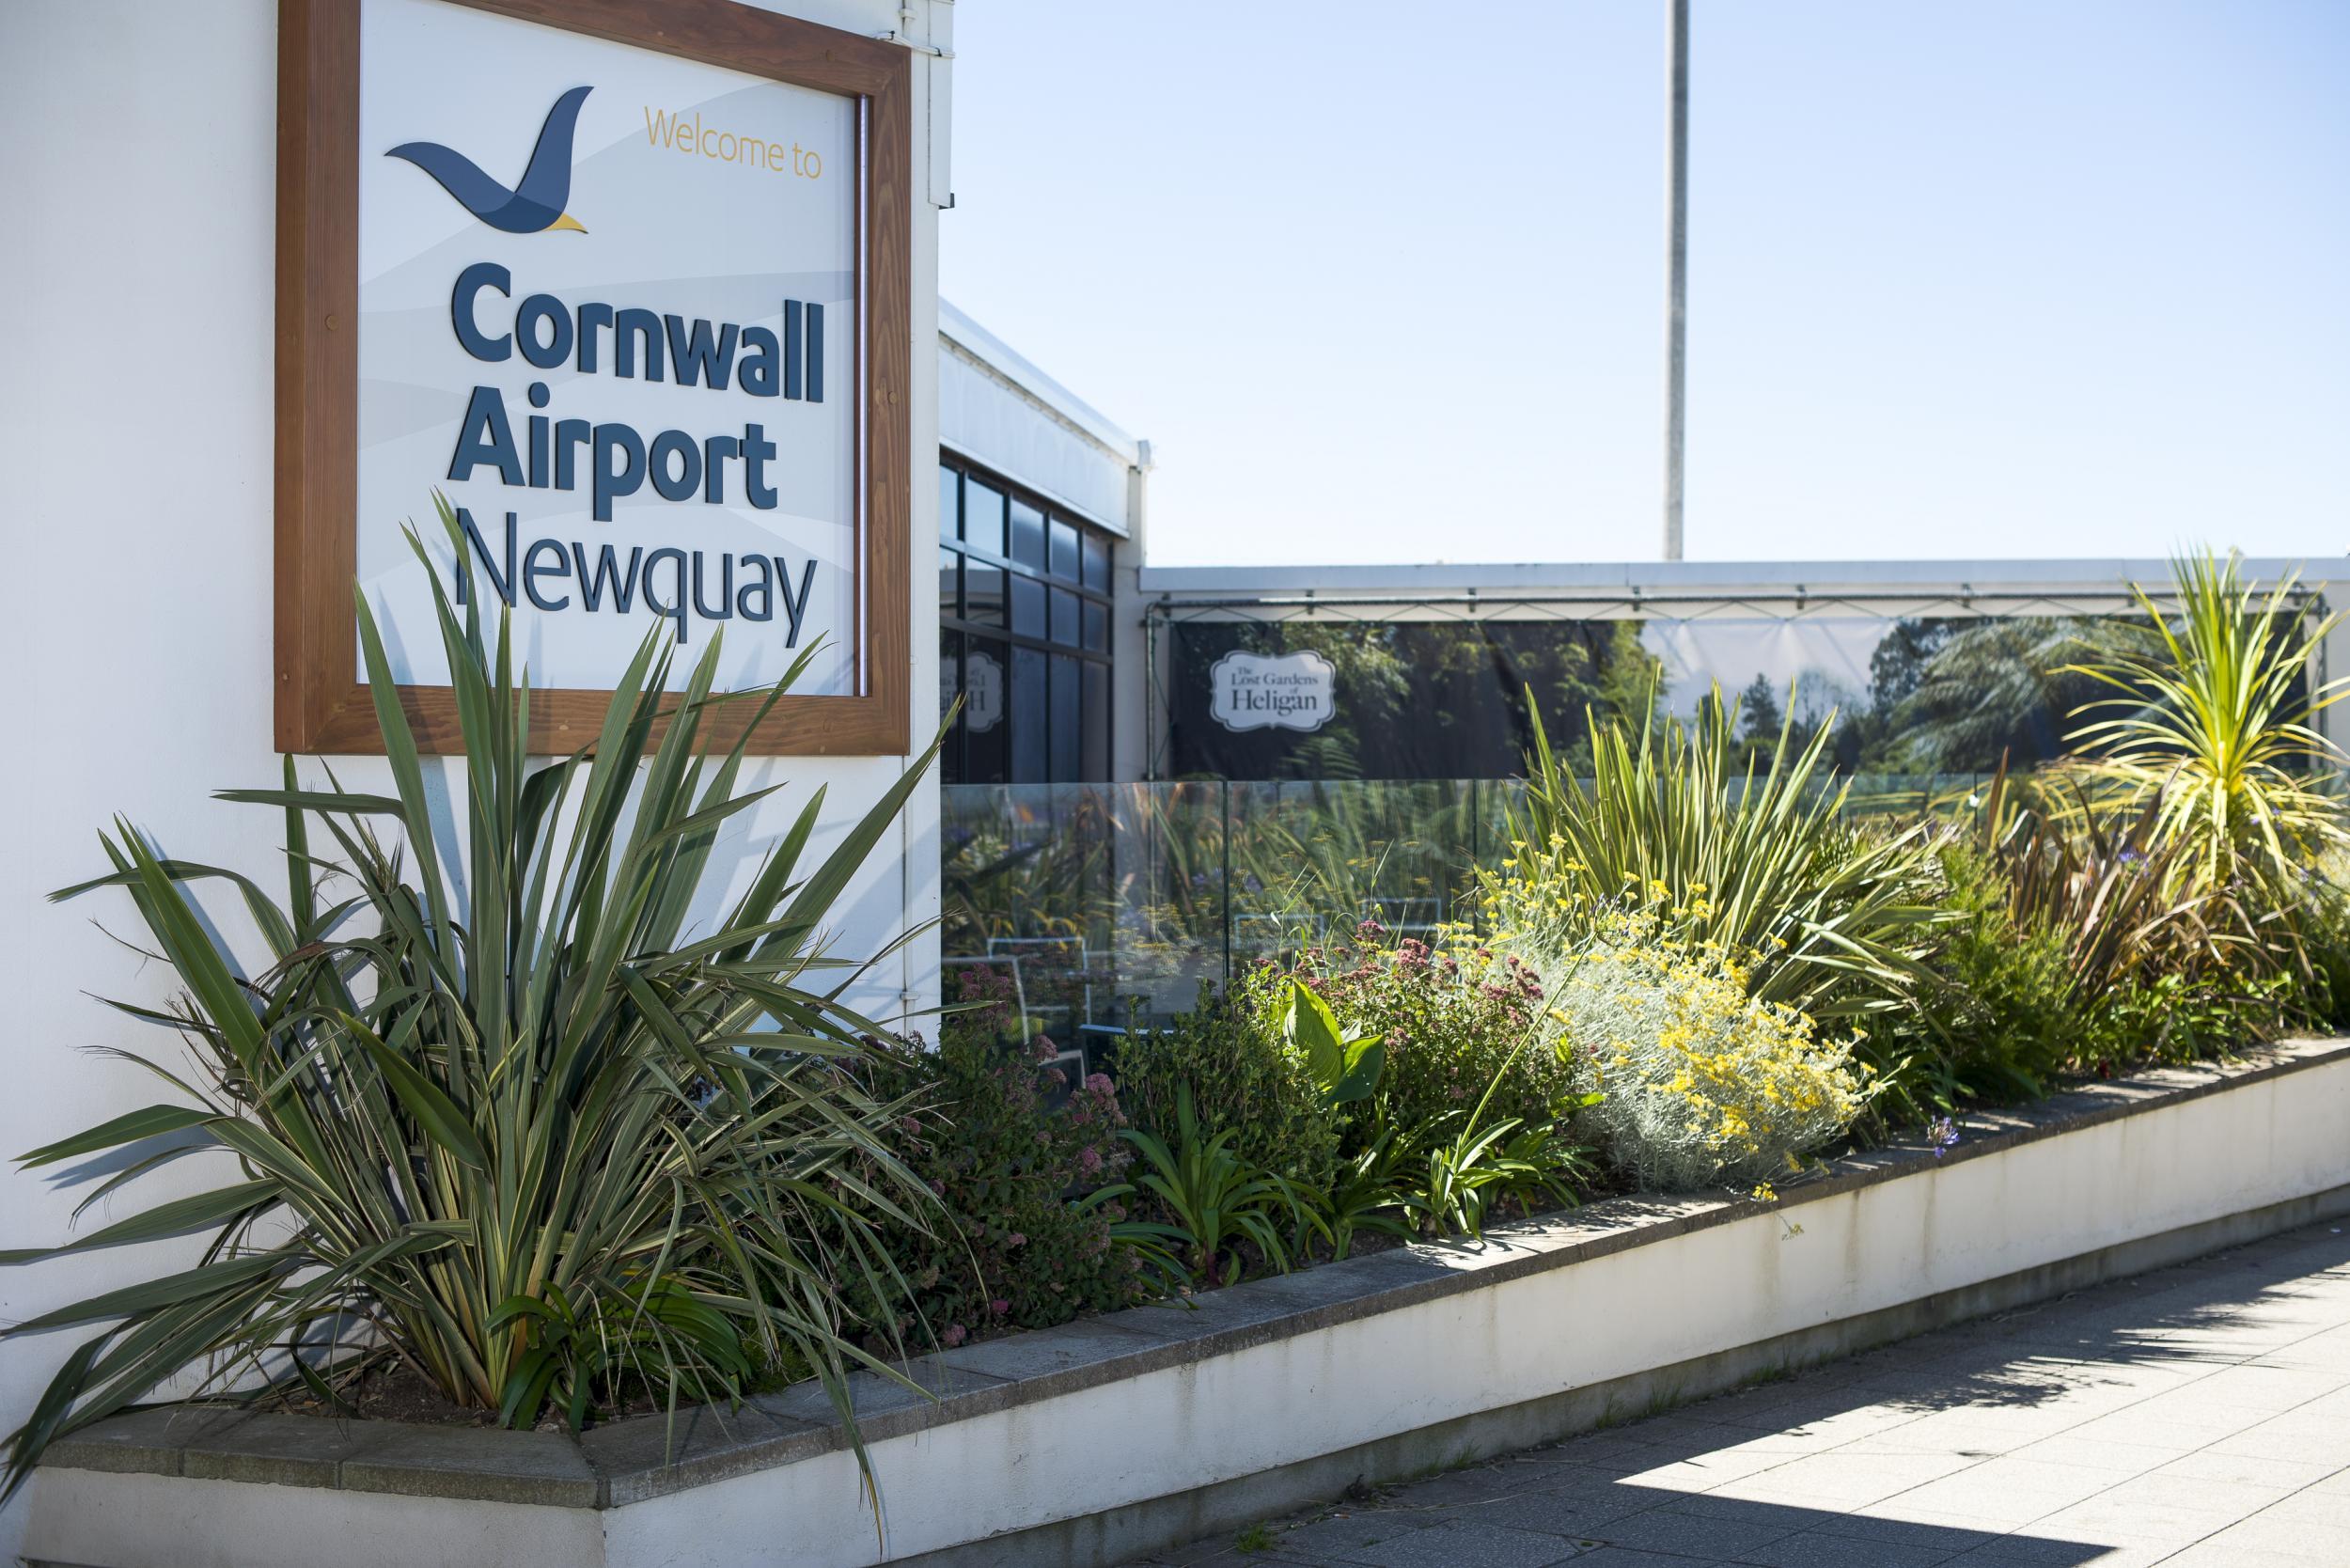 Every airport can learn from Newquay, says Julia